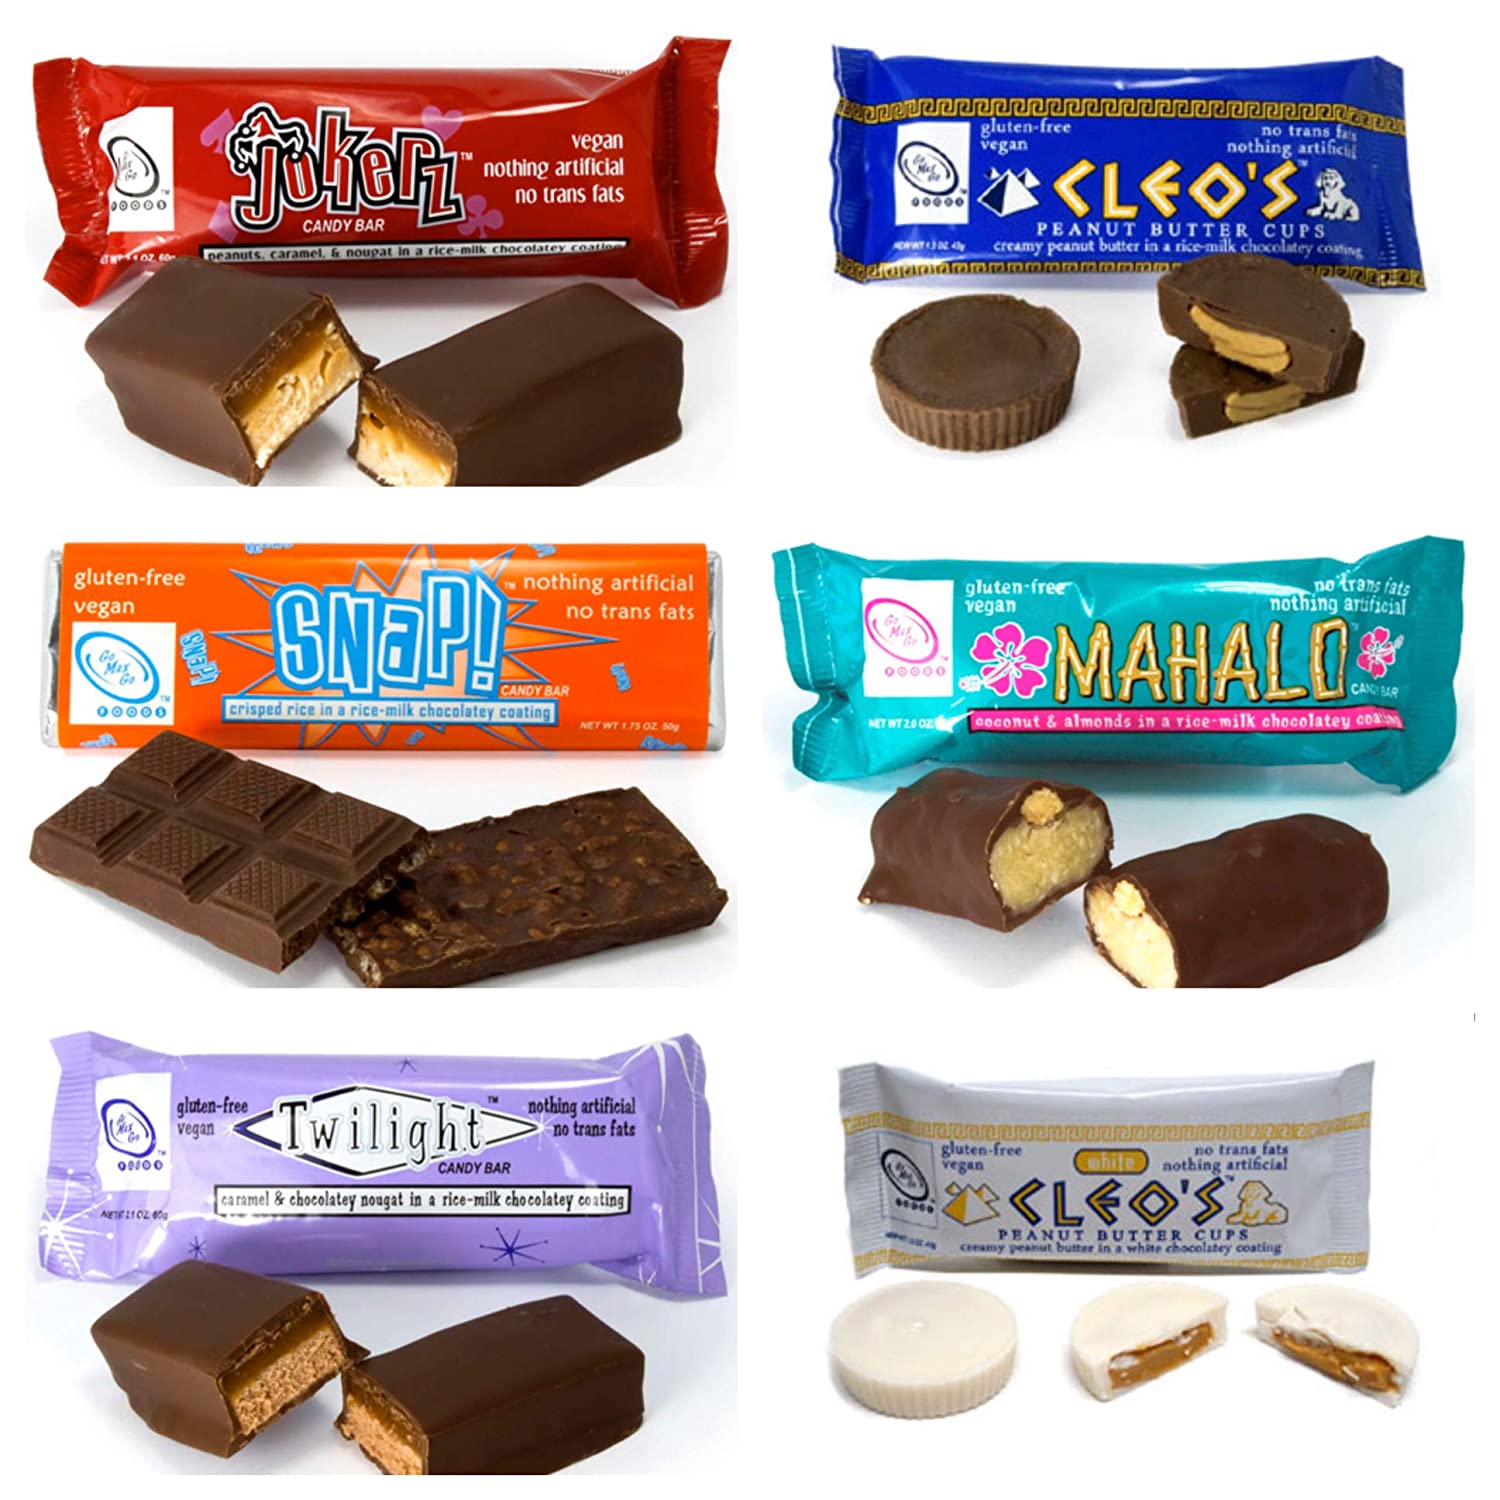 A variety of vegan chocolate bars by Go Max Go